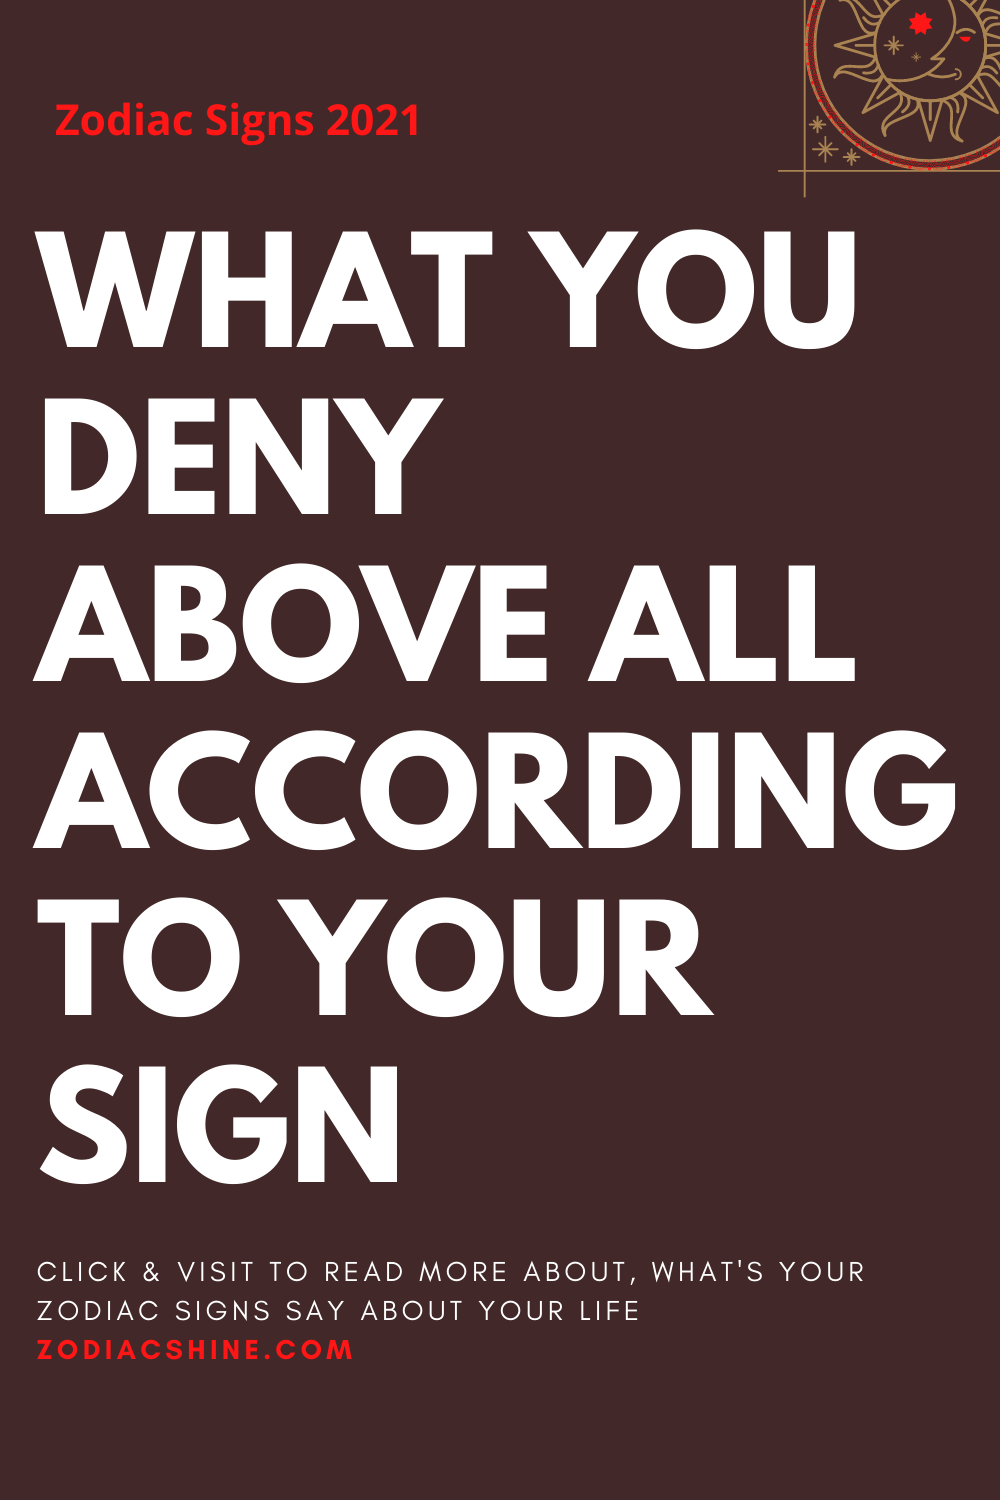 WHAT YOU DENY ABOVE ALL ACCORDING TO YOUR SIGN